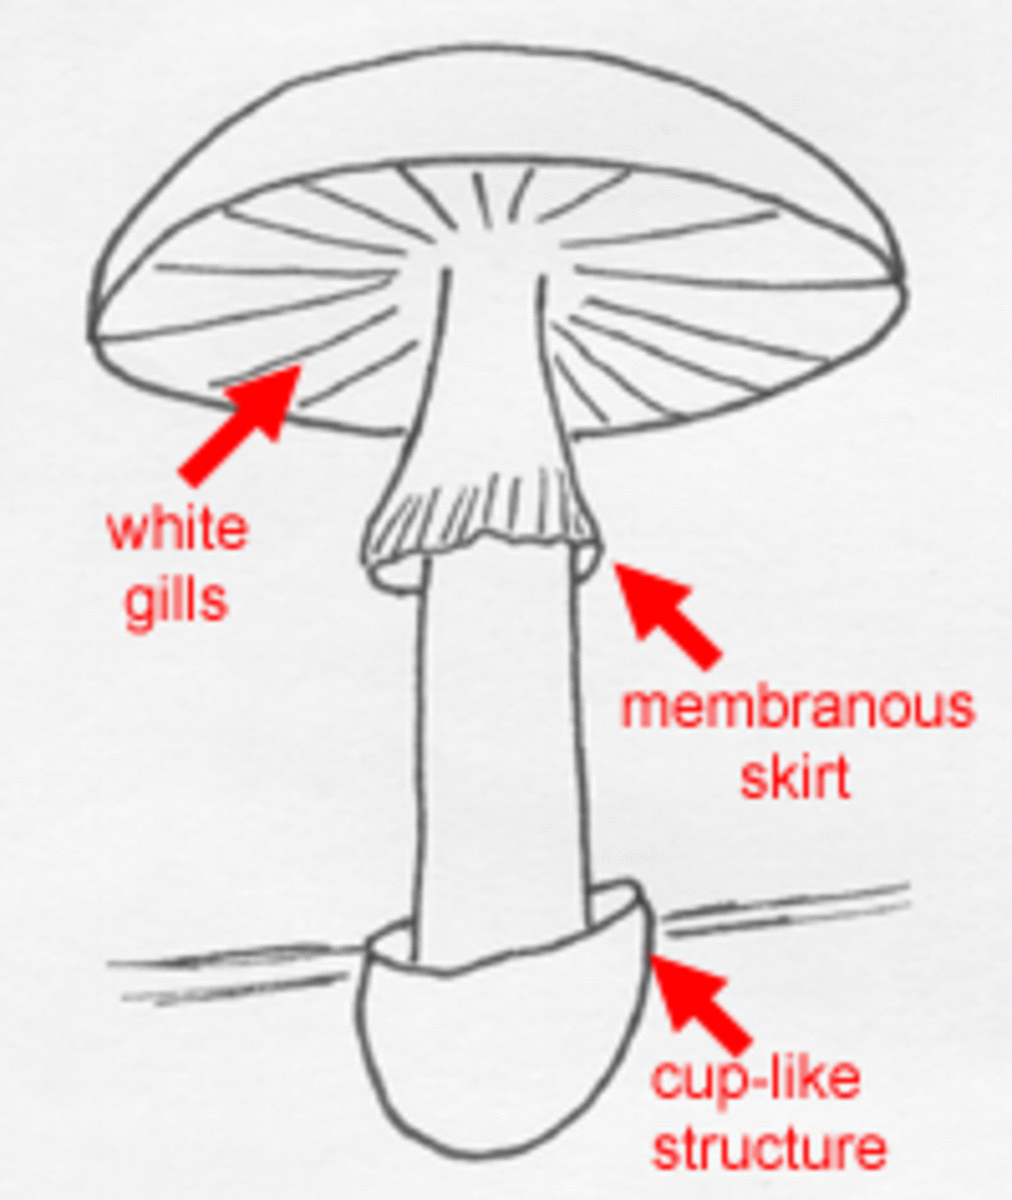 A diagram of a labeled Death-cap mushroom. It is better to error on the side of caution. Never assume that a mushroom is safe, only professionals can truly tell.